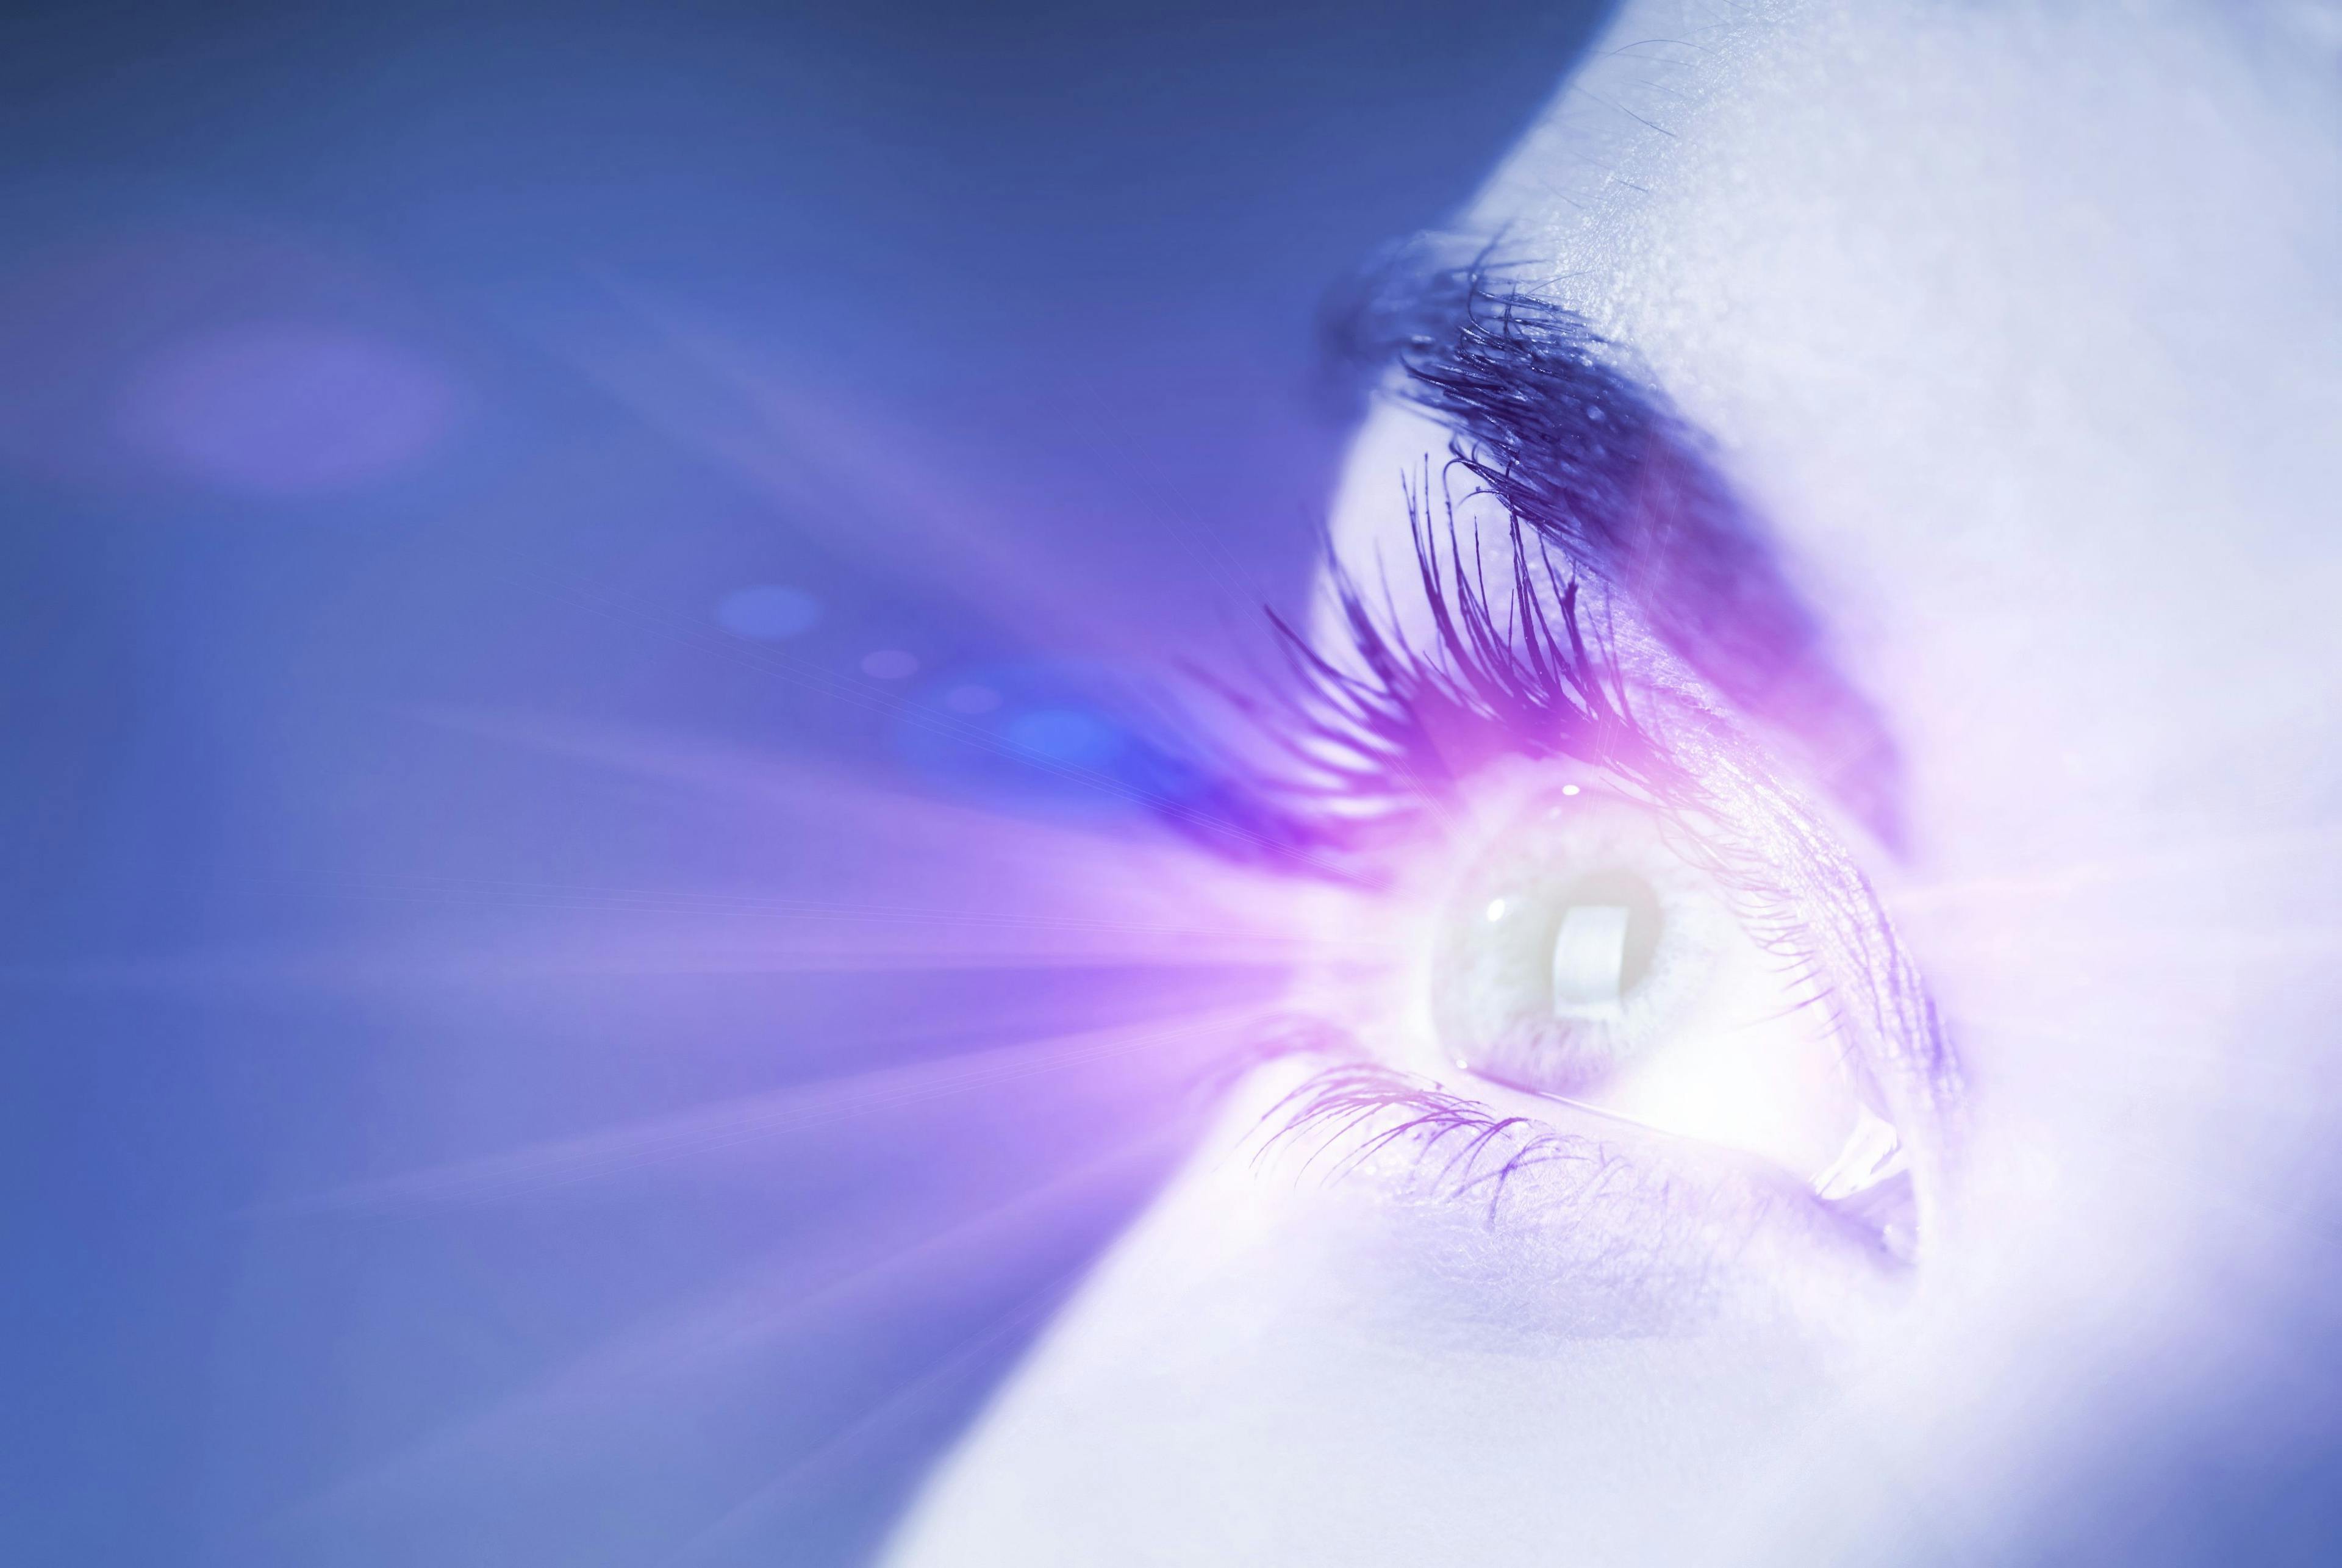 The ViaLase Laser combines a femtosecond laser and micron-level, high-definition image guidance to deliver a noninvasive glaucoma treatment called femtosecond laser image-guided, high-precision trabeculotomy, or FLigHT. (Image courtesy of Adobe Stock/Nejron)